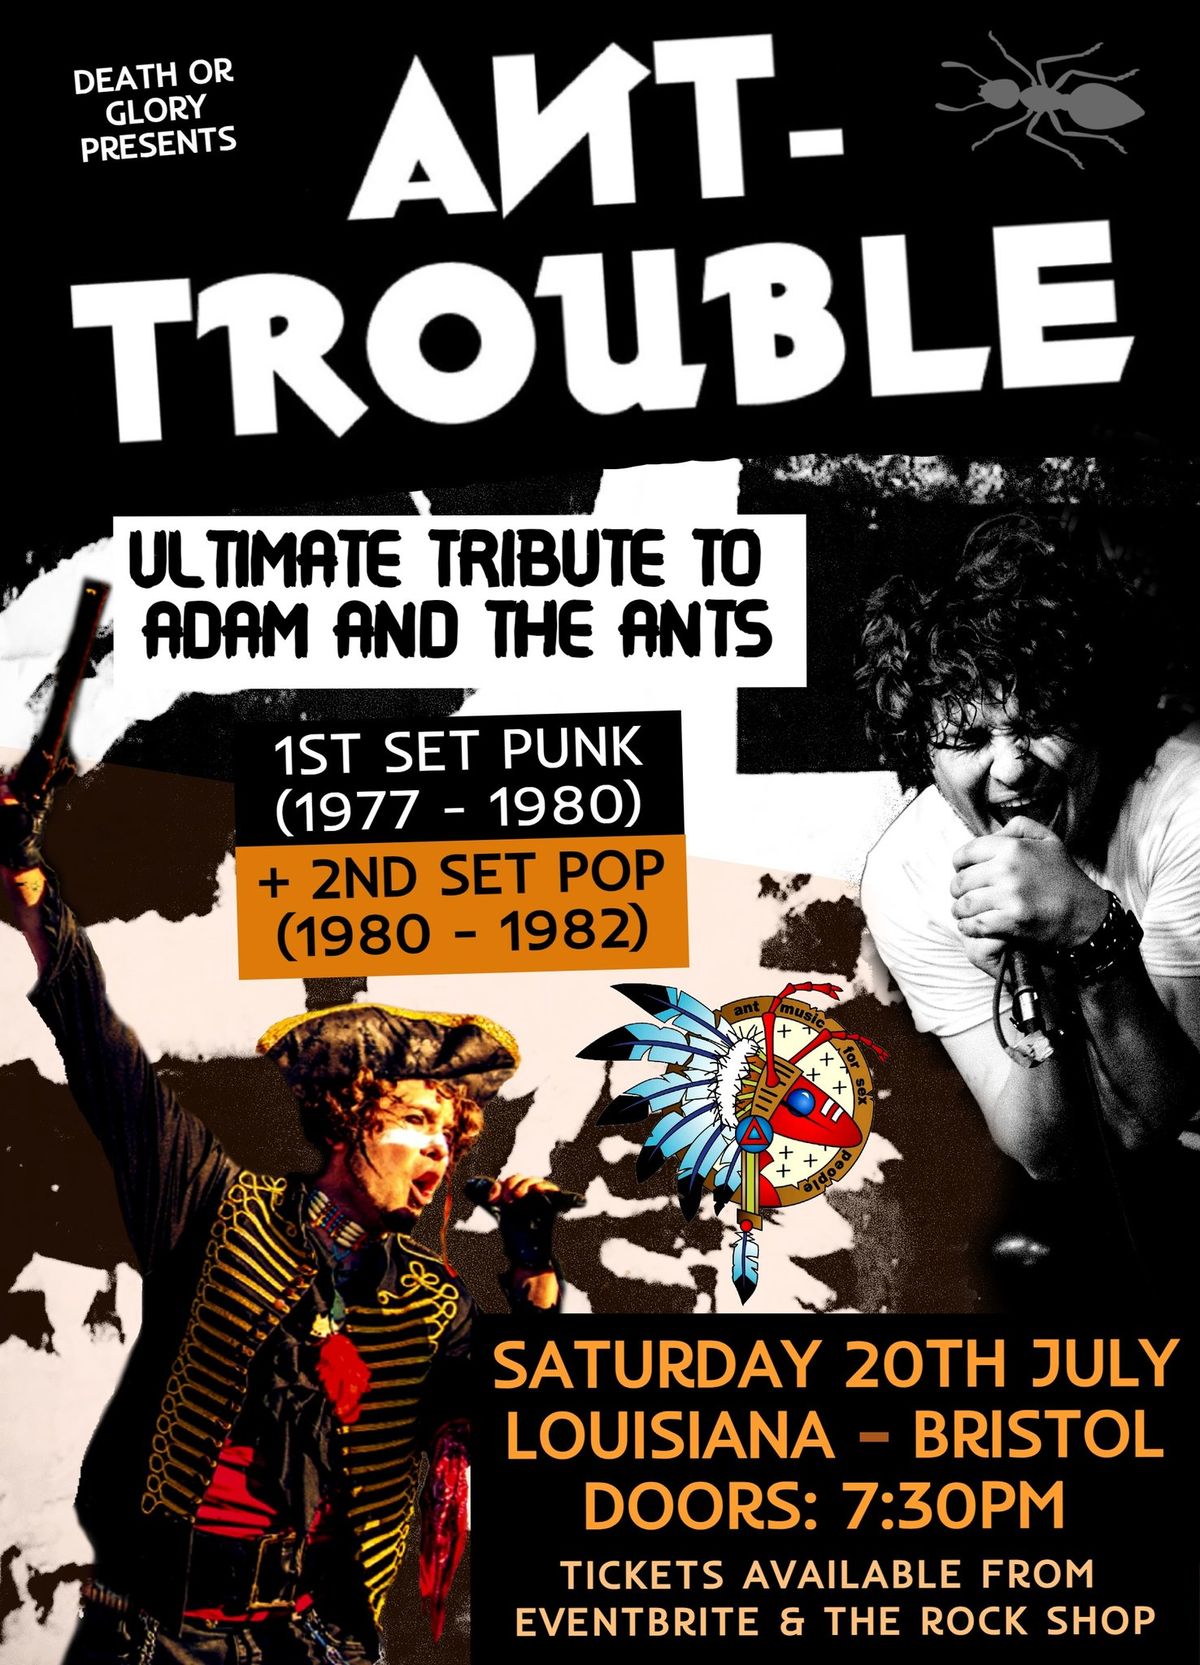 Ant-Trouble (Adam and the Ants Tribute) Louisiana Bristol